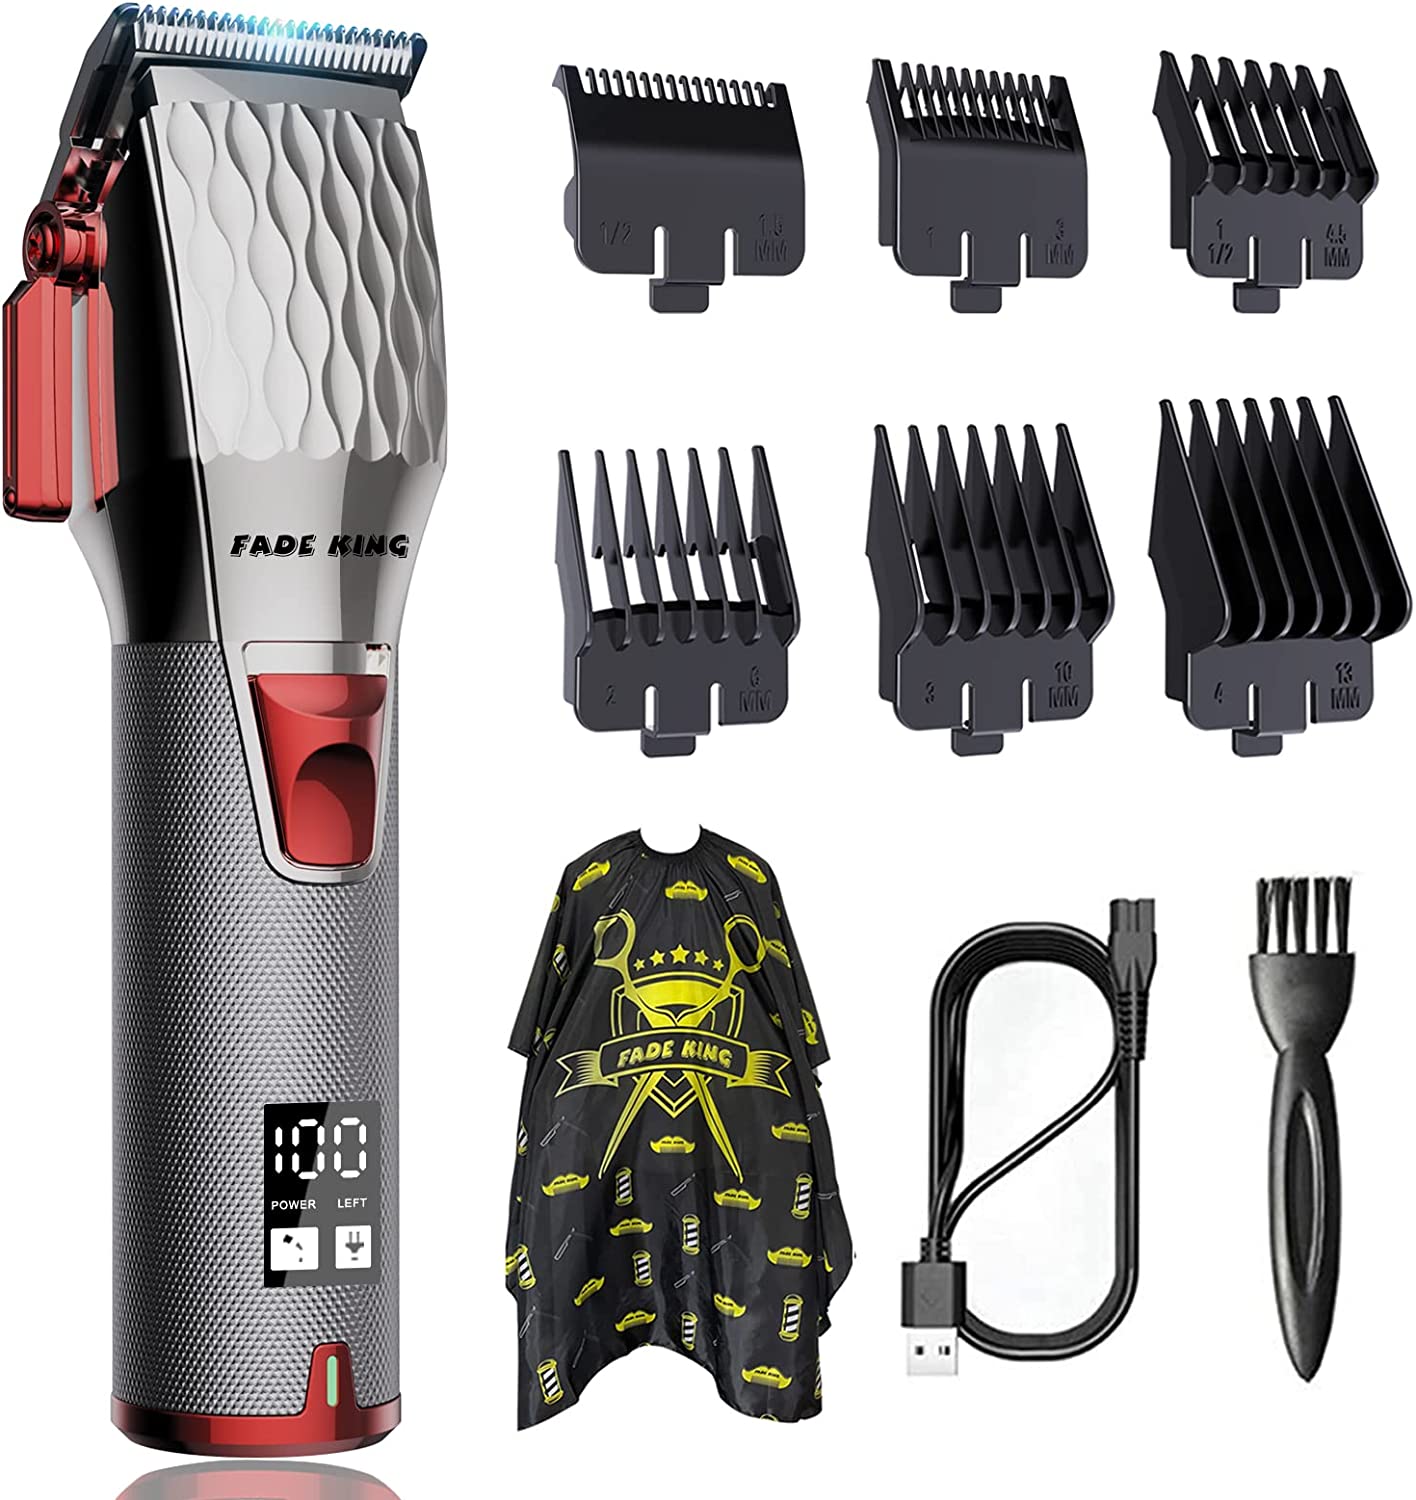 FADEKING Professional Hair Clippers for Men - Cordless Barber Clippers for Hair Cutting, Rechargeable Hair Beard Trimmer with LED Display & Quality Travel Storage Case (Silver Black)